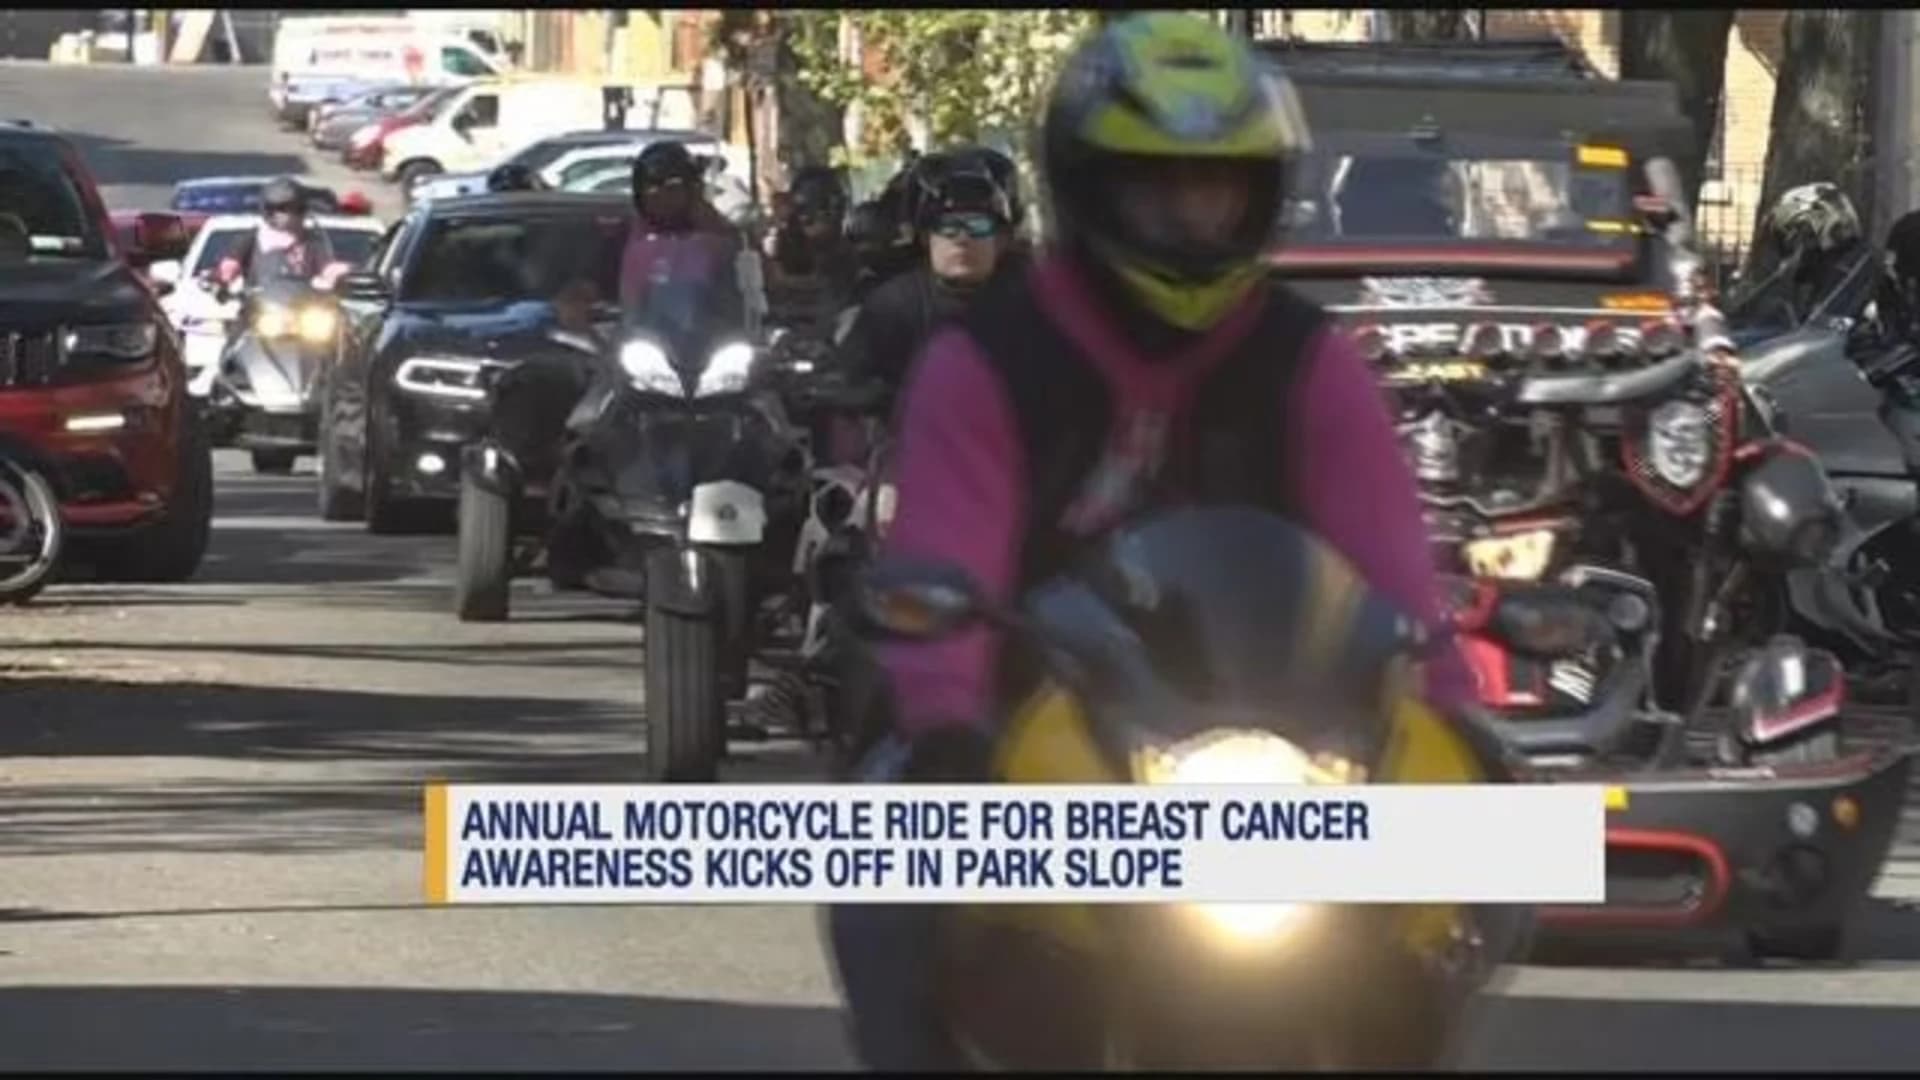 Brooklyn motorcyclists swarm streets in pink, raise awareness for breast cancer